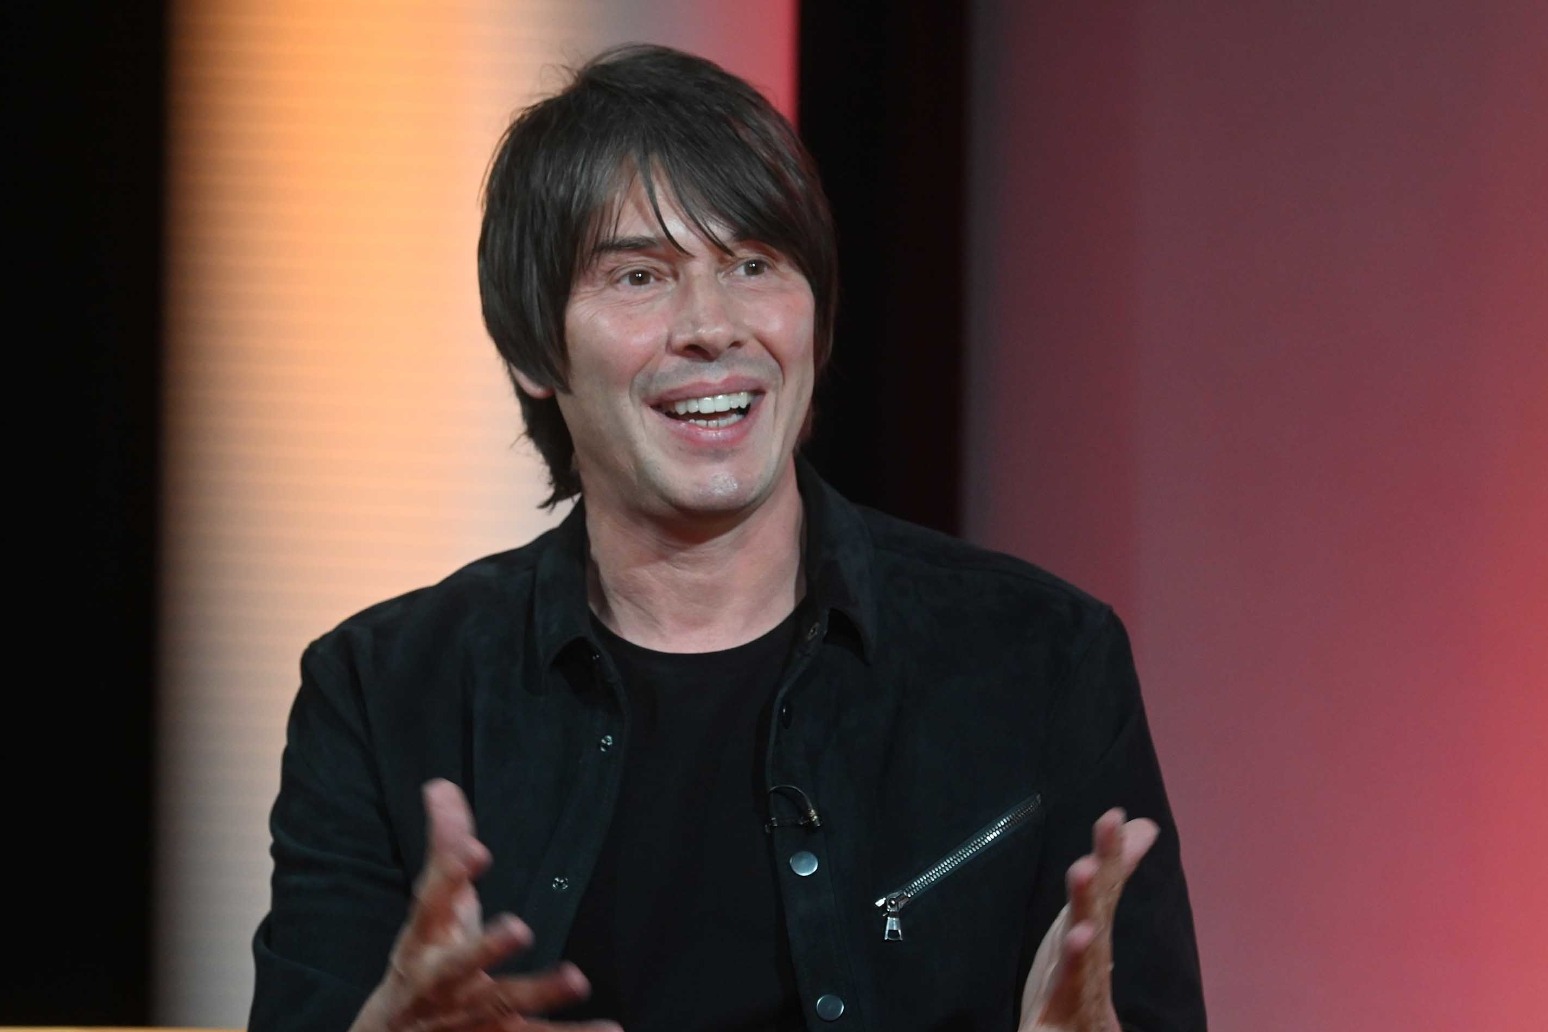 Professor Brian Cox weighs in on existence of UFOs after senate hearing 